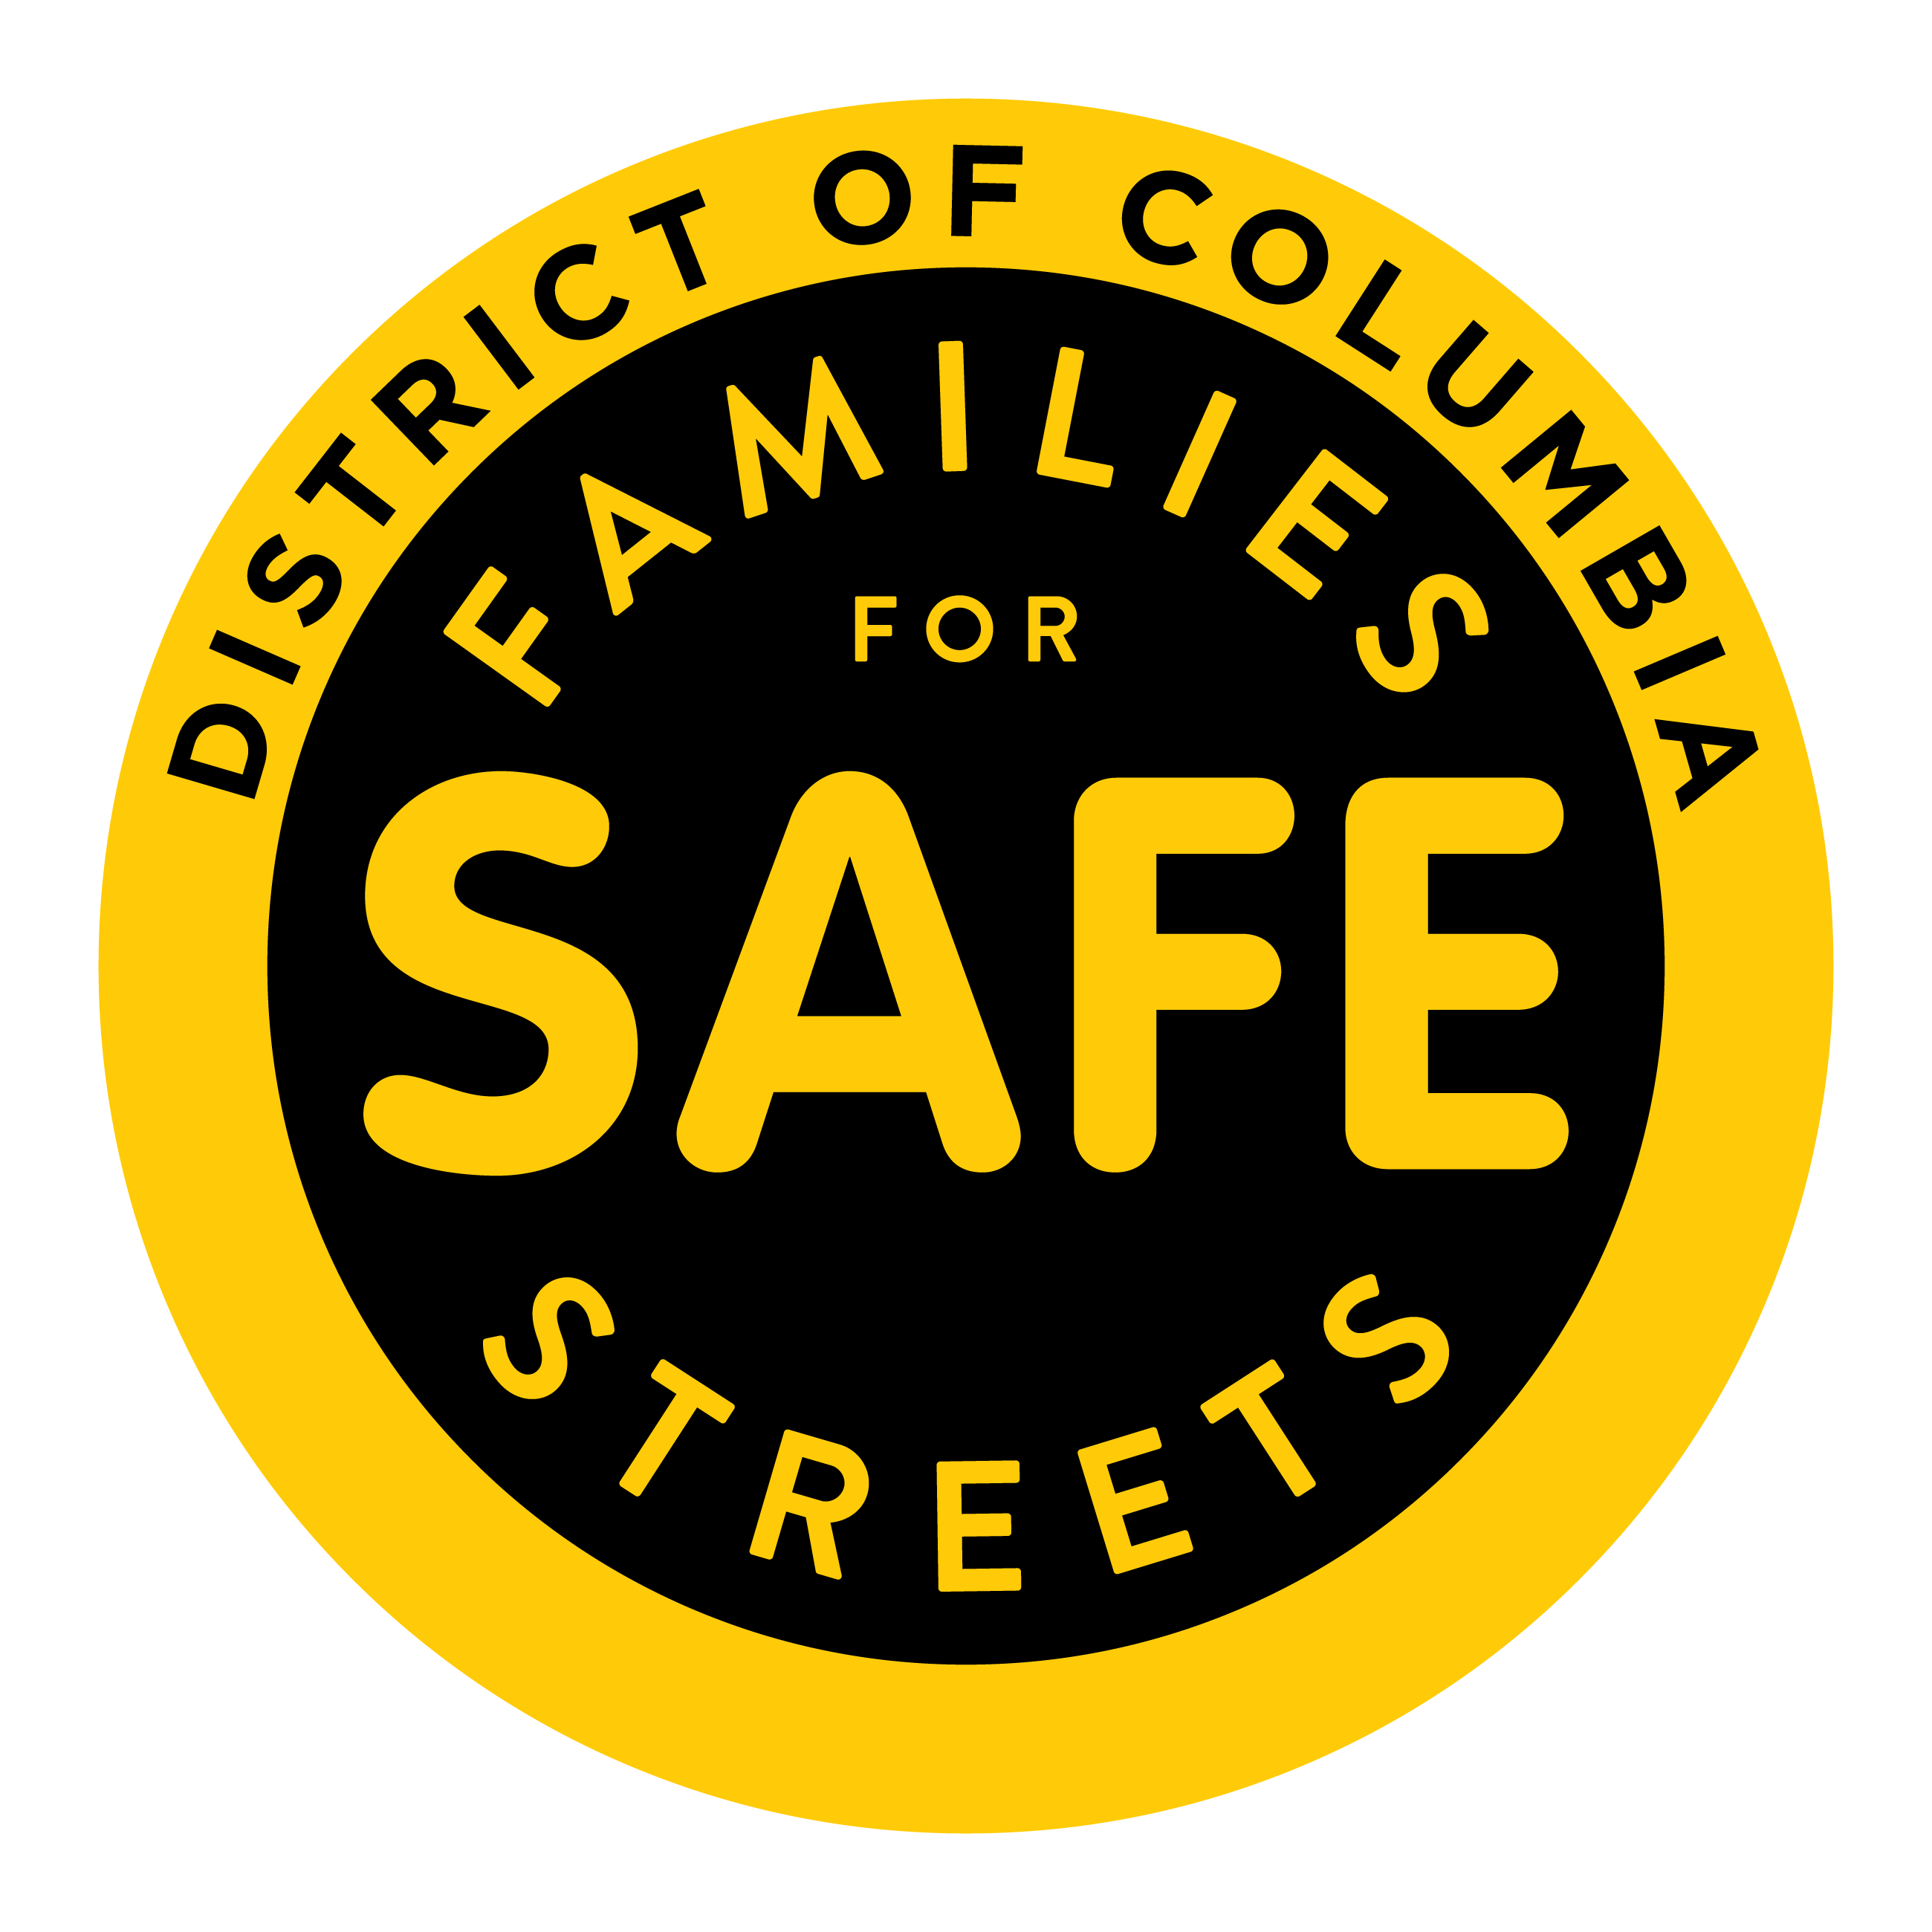 DC Families for Safe Streets